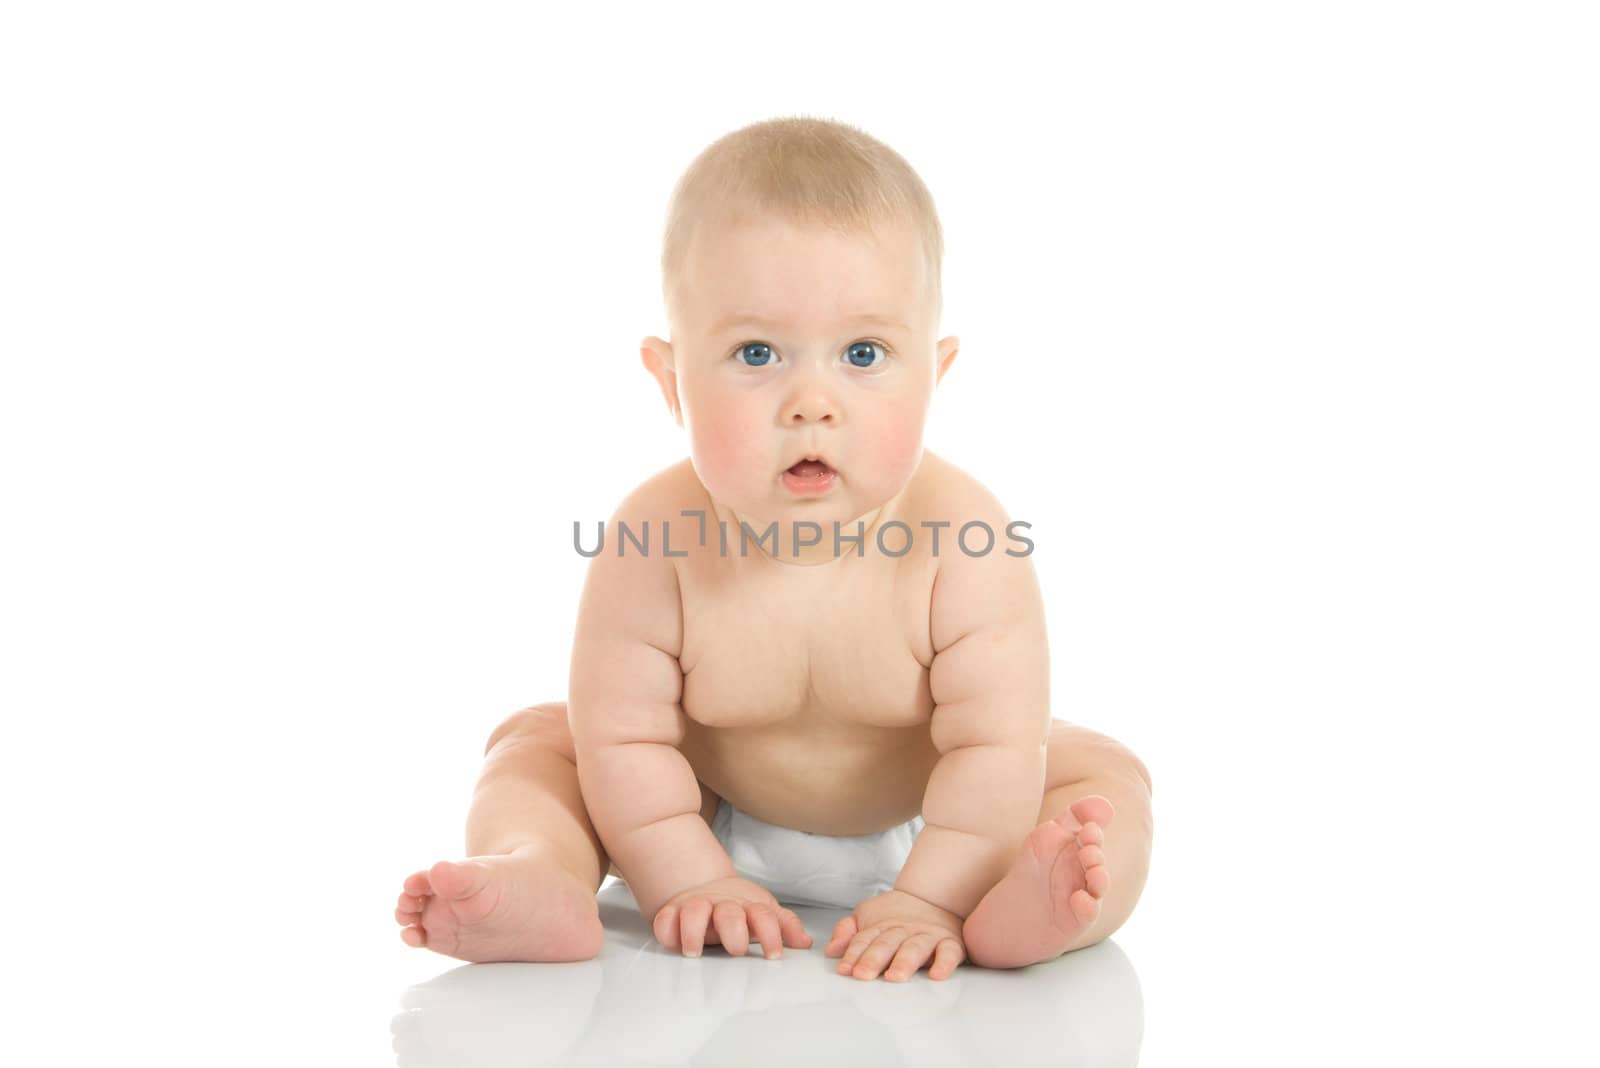 Sitting small baby isolated over white